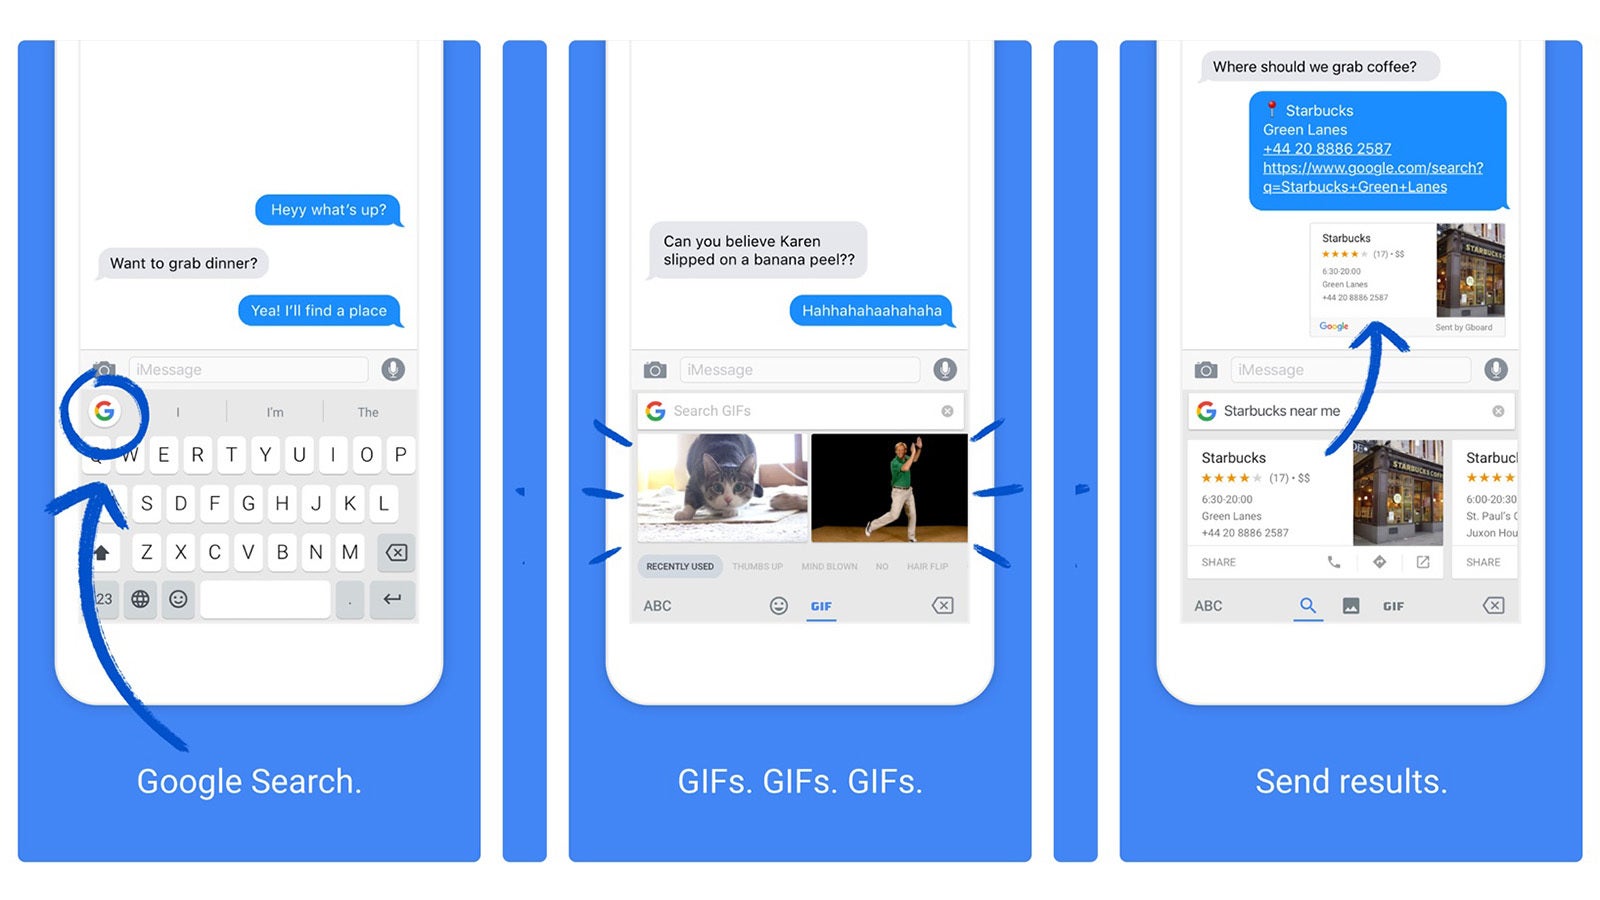 Gboard brings haptic feedback to iPhone typing with its latest update, version 1.40 - Haptic feedback arrives to iPhone typing thanks to Google